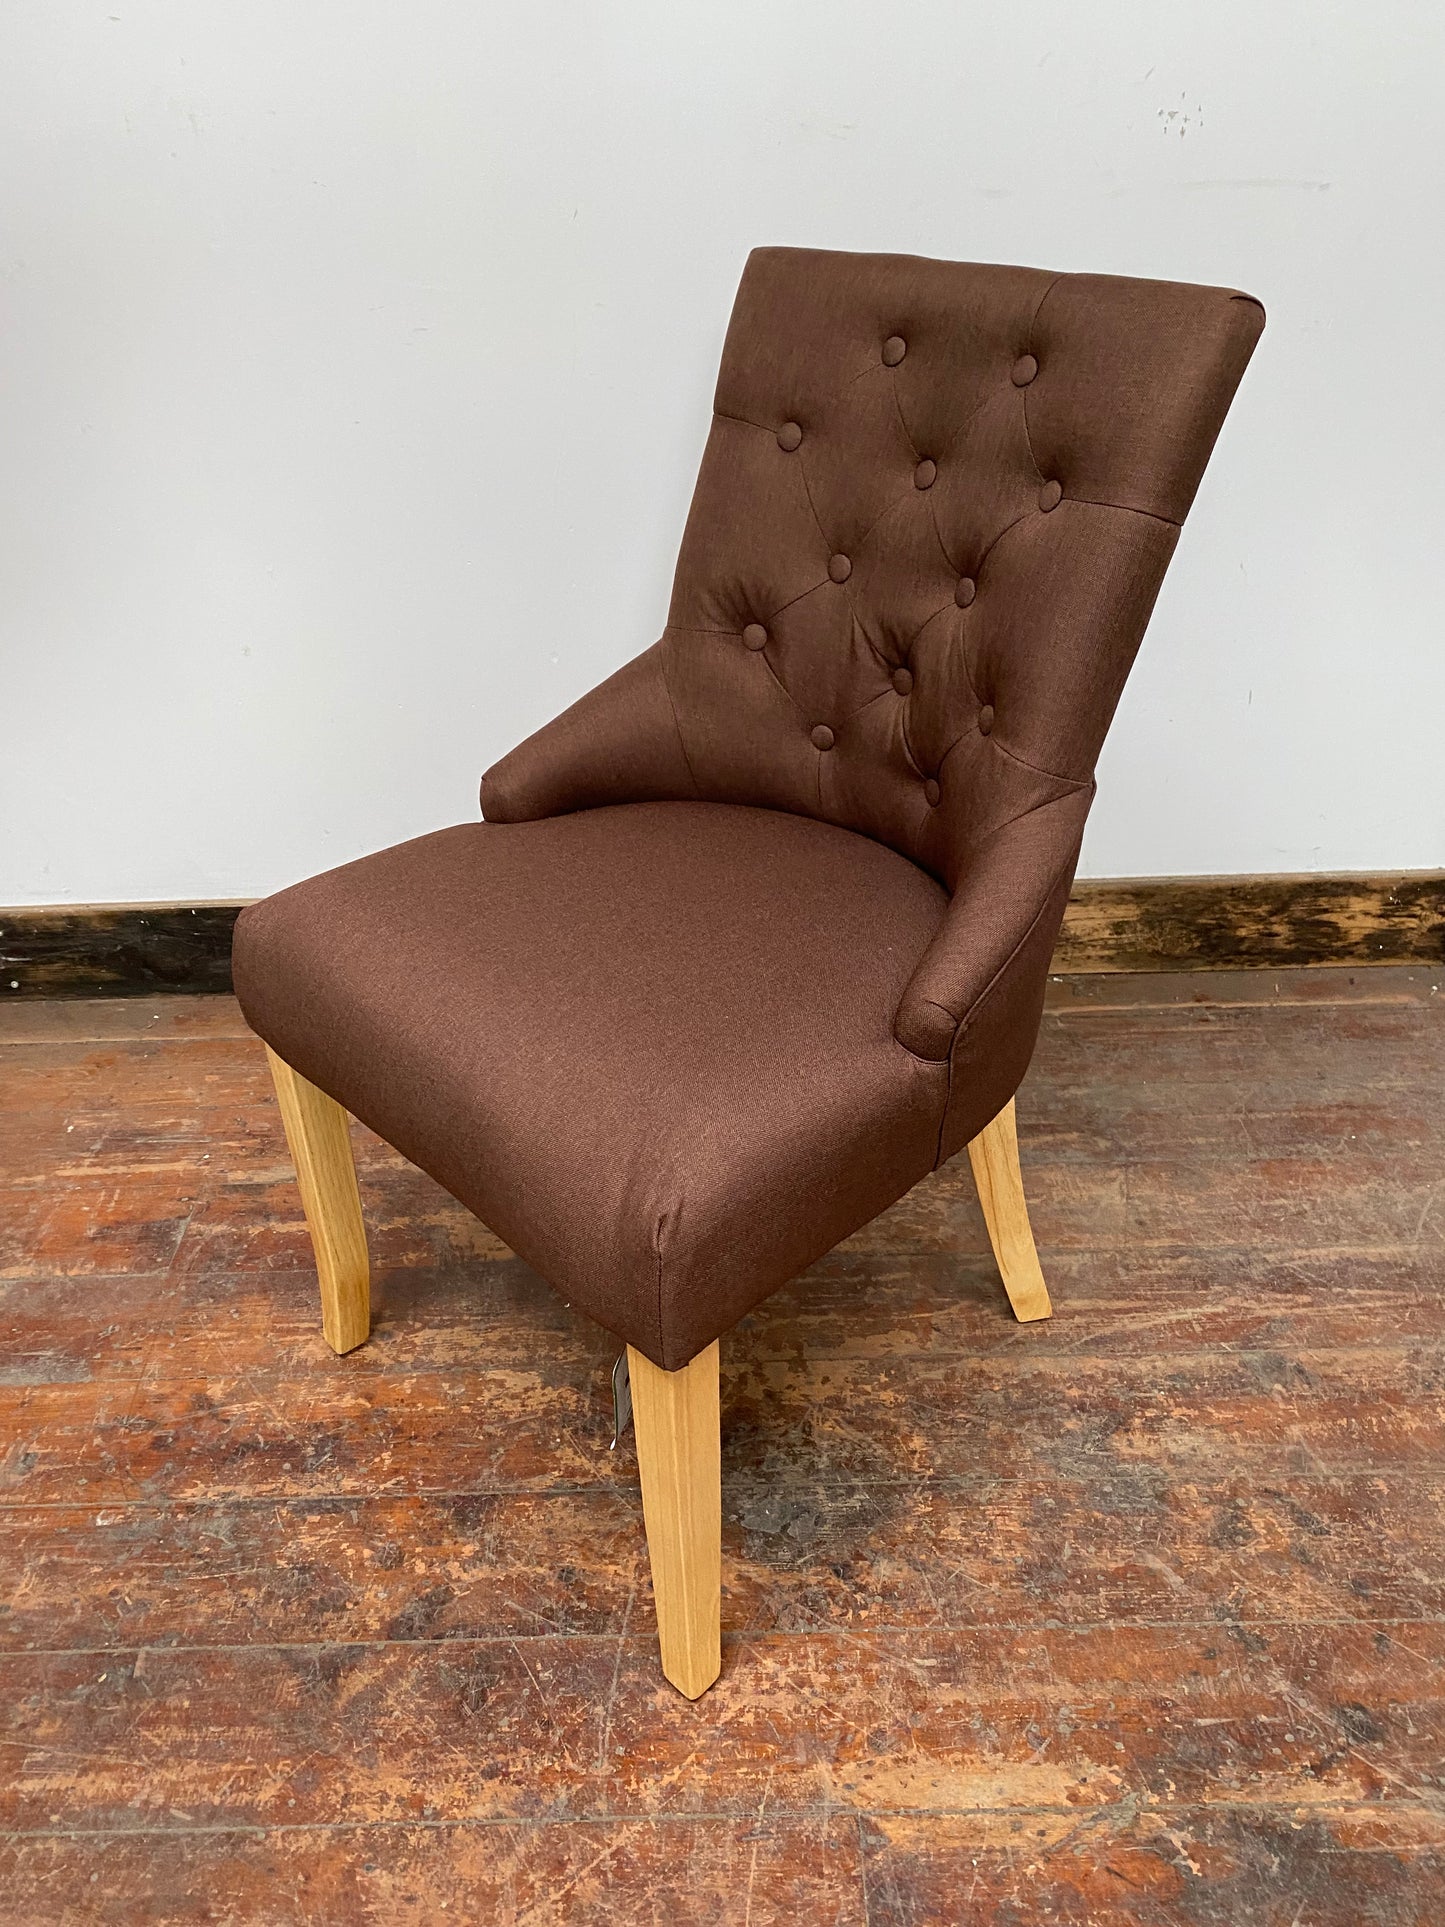 PAIR OF BROWN DINING CHAIRS (NEW)